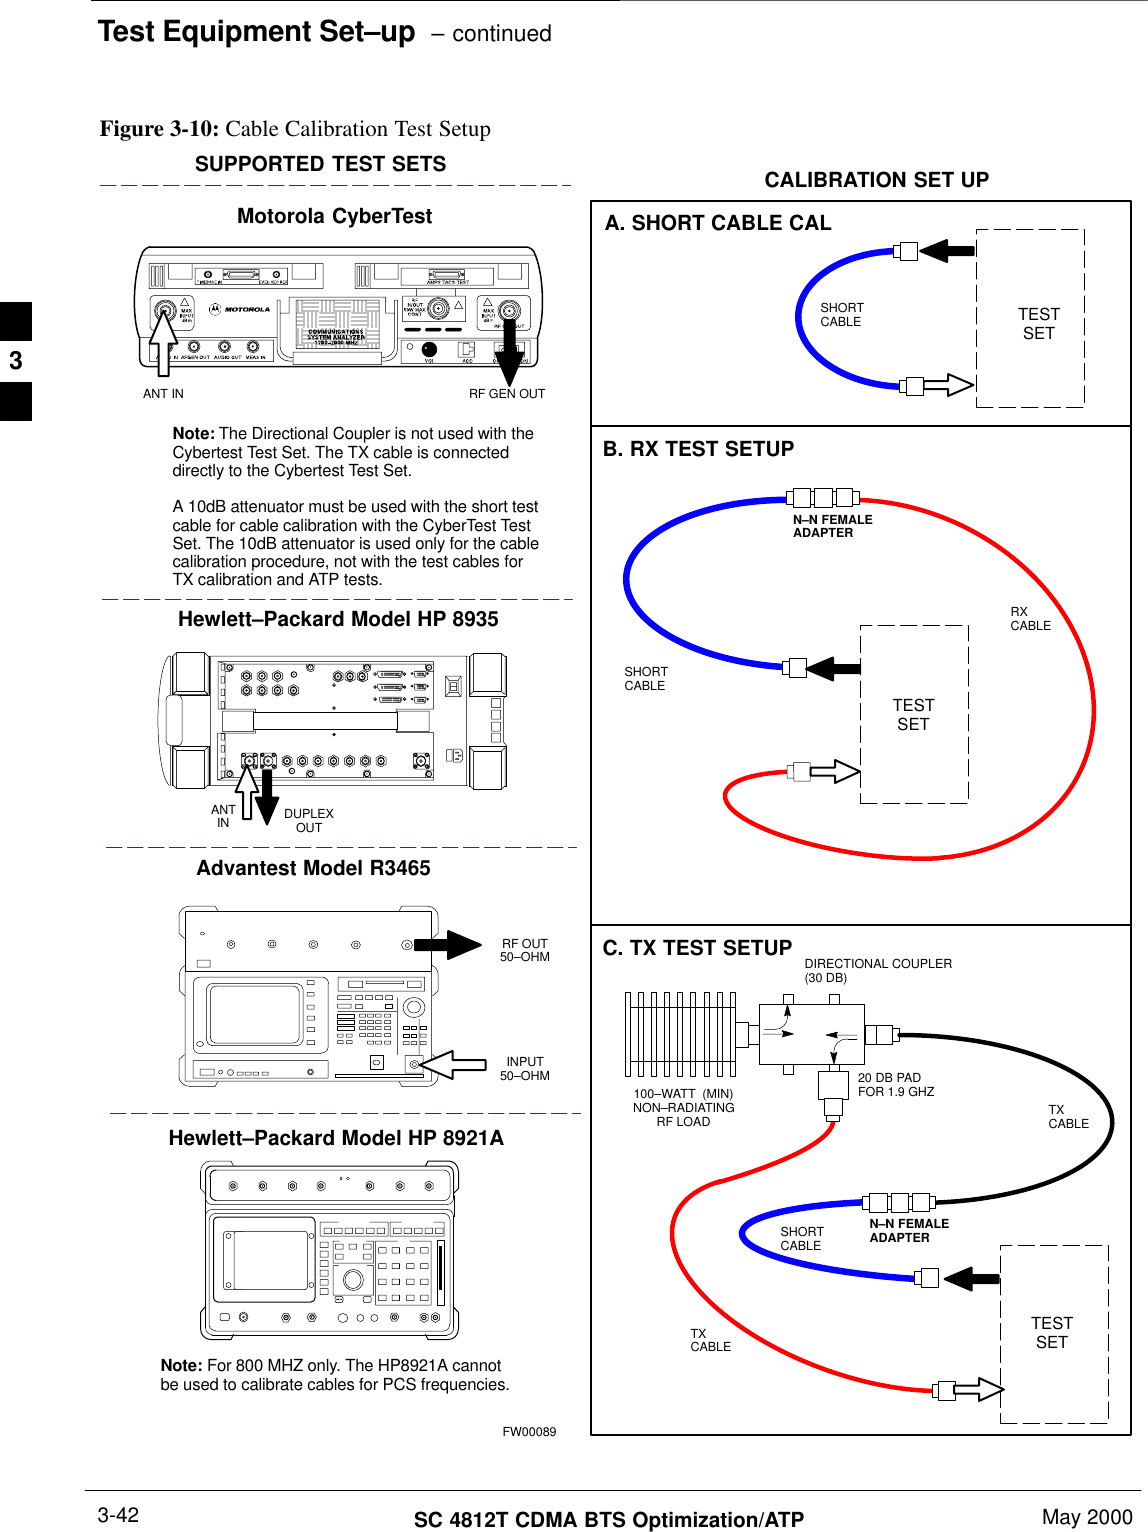 Test Equipment Set–up  – continuedSC 4812T CDMA BTS Optimization/ATP May 20003-42Figure 3-10: Cable Calibration Test SetupMotorola CyberTestHewlett–Packard Model HP 8935Advantest Model R3465DUPLEXOUTRF OUT50–OHMINPUT50–OHMRF GEN OUTANT INANTINSUPPORTED TEST SETS100–WATT  (MIN)NON–RADIATINGRF LOADTESTSETA. SHORT CABLE CALSHORTCABLEB. RX TEST SETUPTESTSETC. TX TEST SETUP20 DB PADFOR 1.9 GHZCALIBRATION SET UPN–N FEMALEADAPTERTXCABLETXCABLESHORTCABLENote: The Directional Coupler is not used with theCybertest Test Set. The TX cable is connecteddirectly to the Cybertest Test Set.A 10dB attenuator must be used with the short testcable for cable calibration with the CyberTest TestSet. The 10dB attenuator is used only for the cablecalibration procedure, not with the test cables forTX calibration and ATP tests.TESTSETRXCABLESHORTCABLEFW00089Note: For 800 MHZ only. The HP8921A cannotbe used to calibrate cables for PCS frequencies.Hewlett–Packard Model HP 8921ADIRECTIONAL COUPLER (30 DB)N–N FEMALEADAPTER3